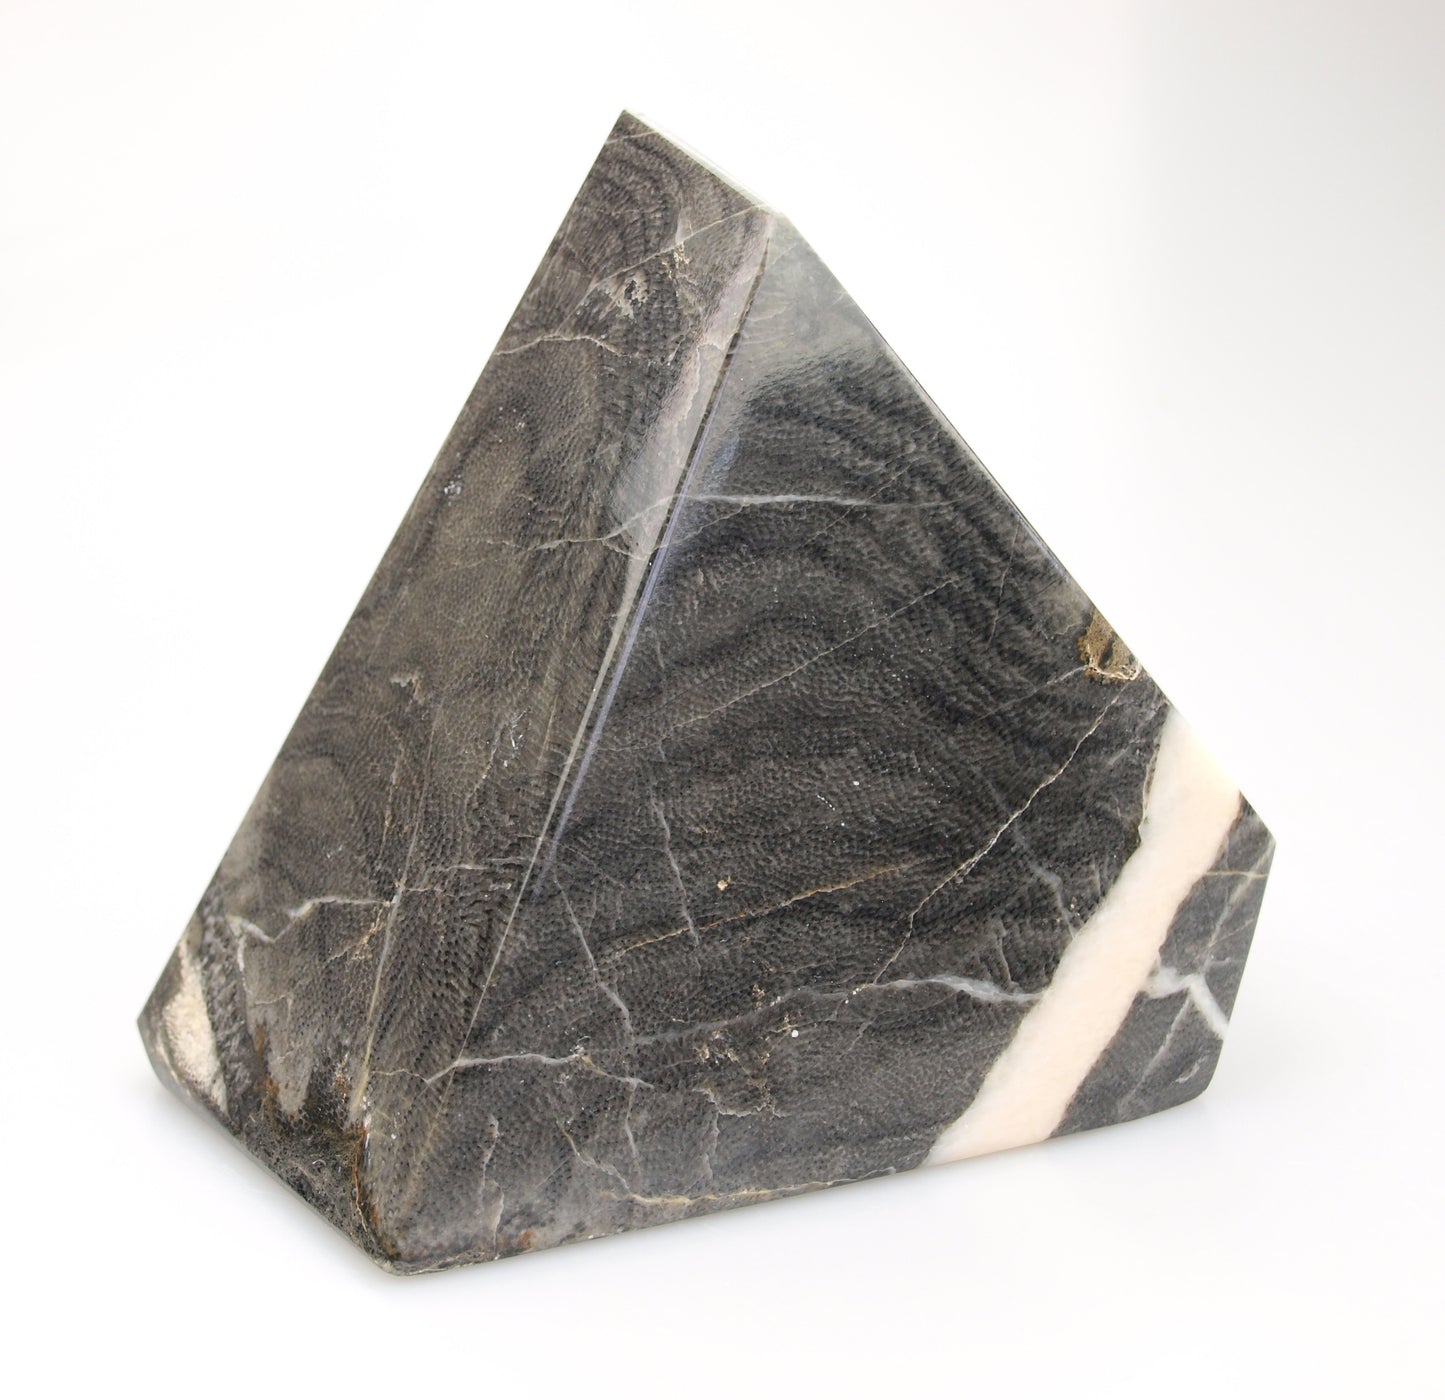 A massive paperweight made of flaky coral intersected by a vein of calcite